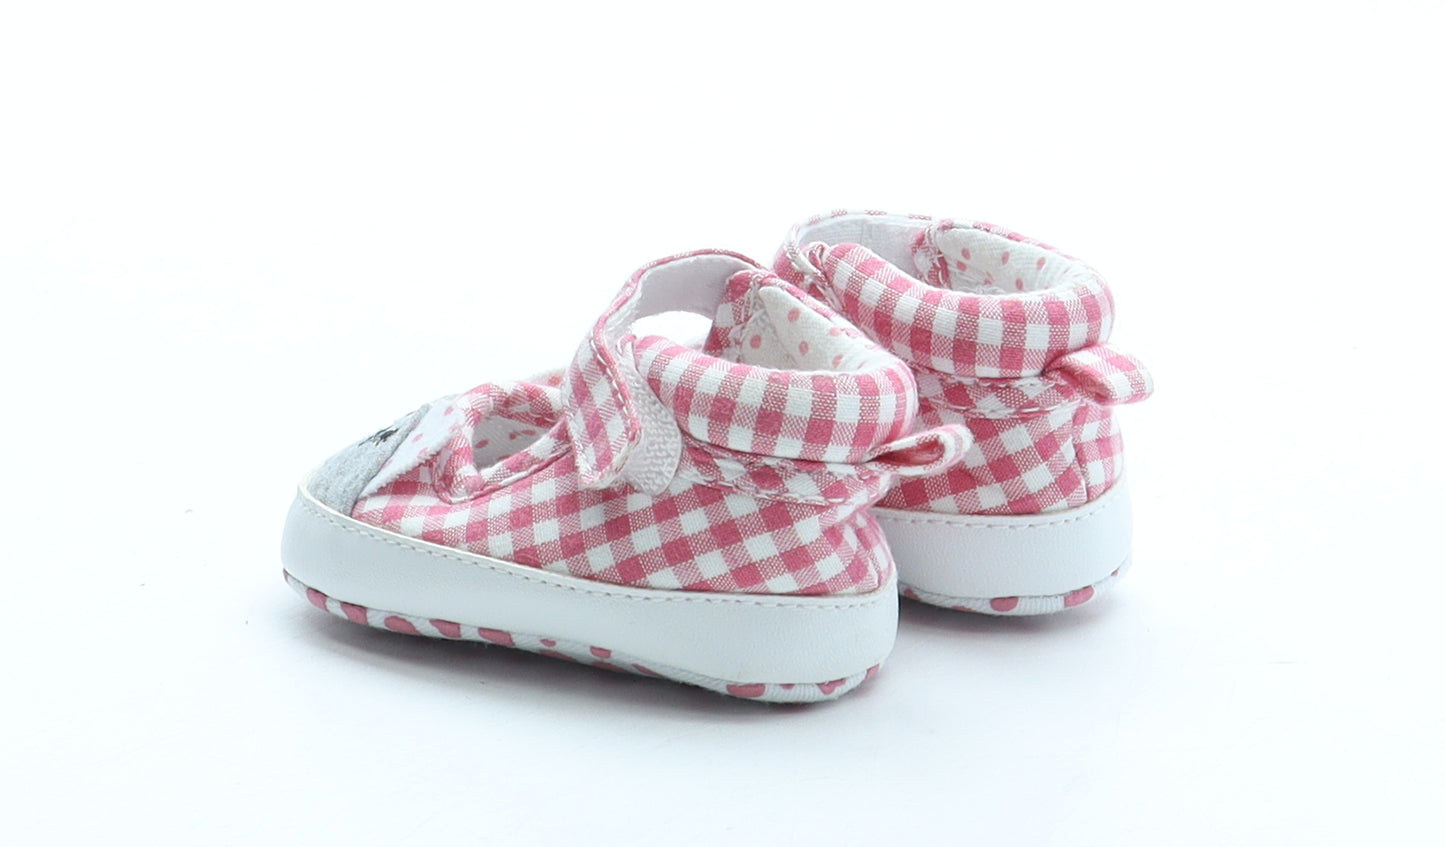 Primark Girls Multicoloured Check Polyester Bootie Casual UK 0-6 Months - Cat